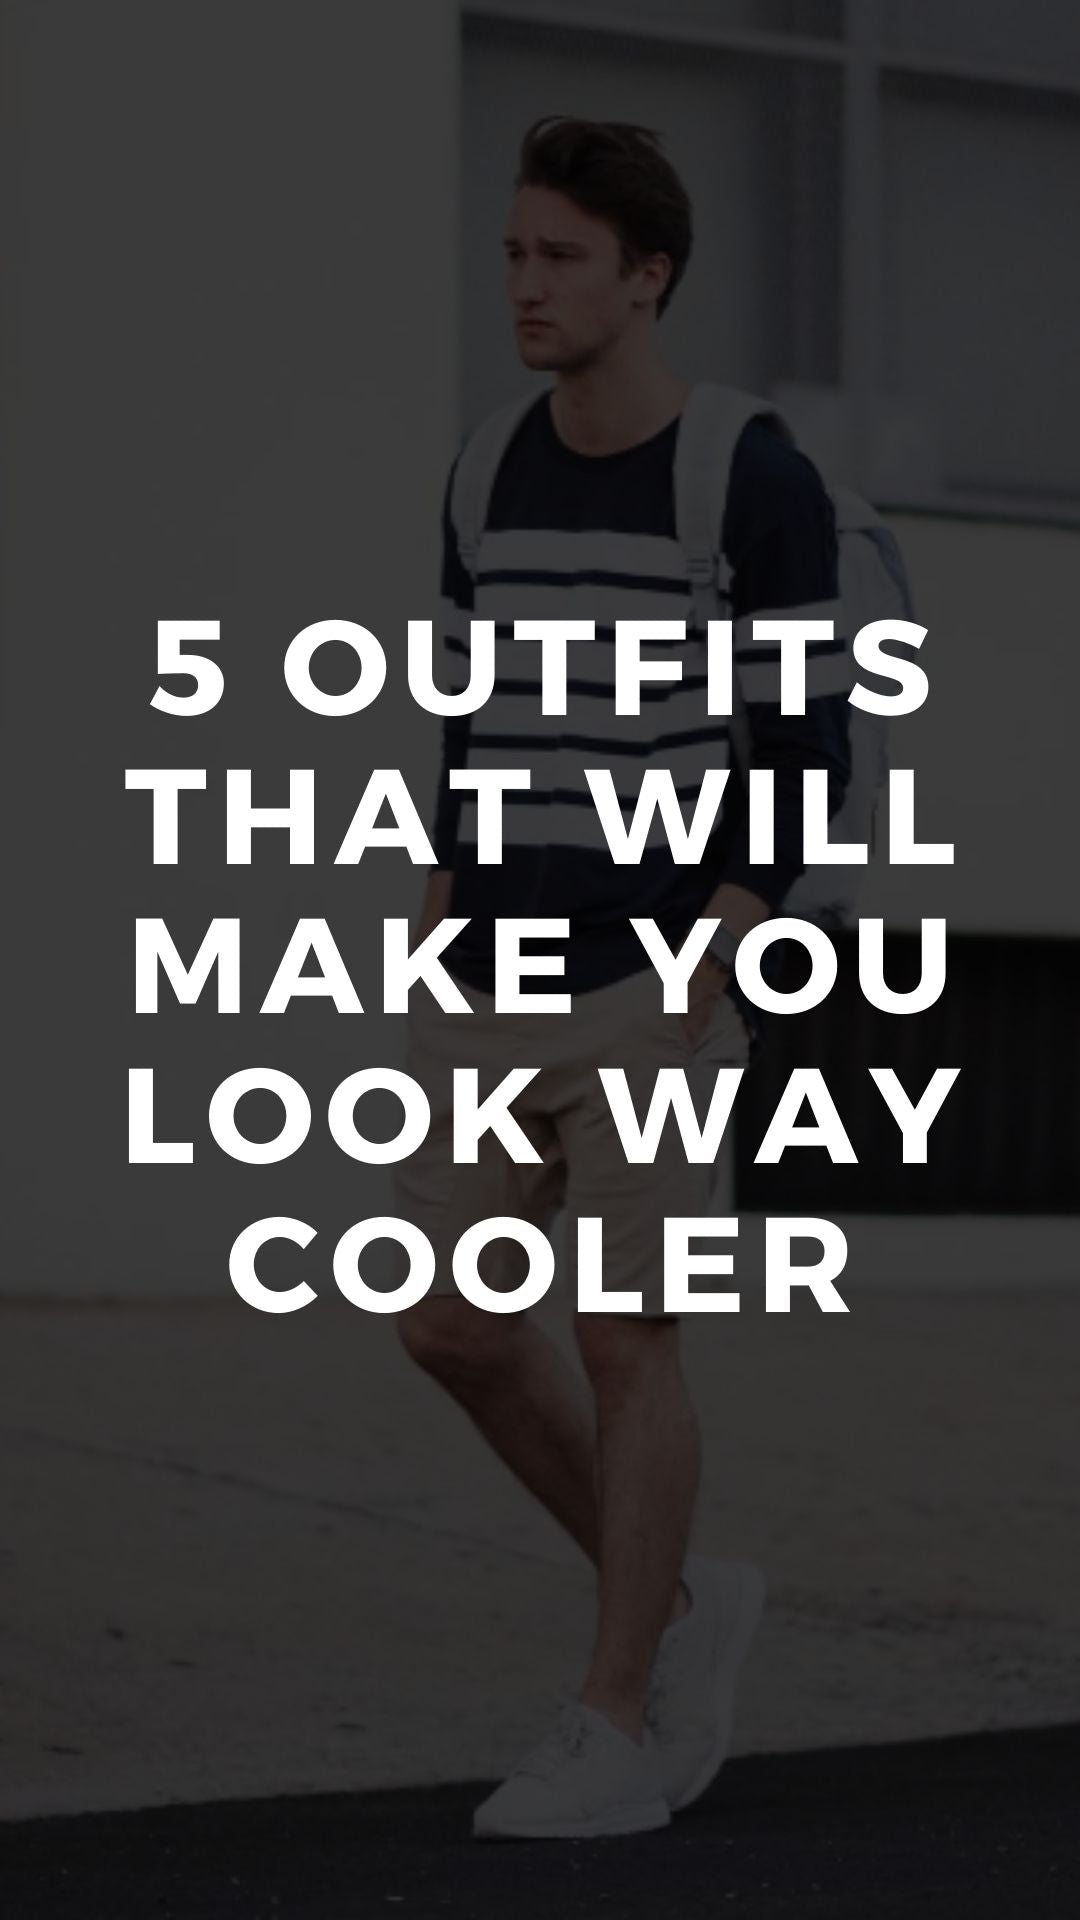 5 Outfits That Will Make You Look Way Cooler